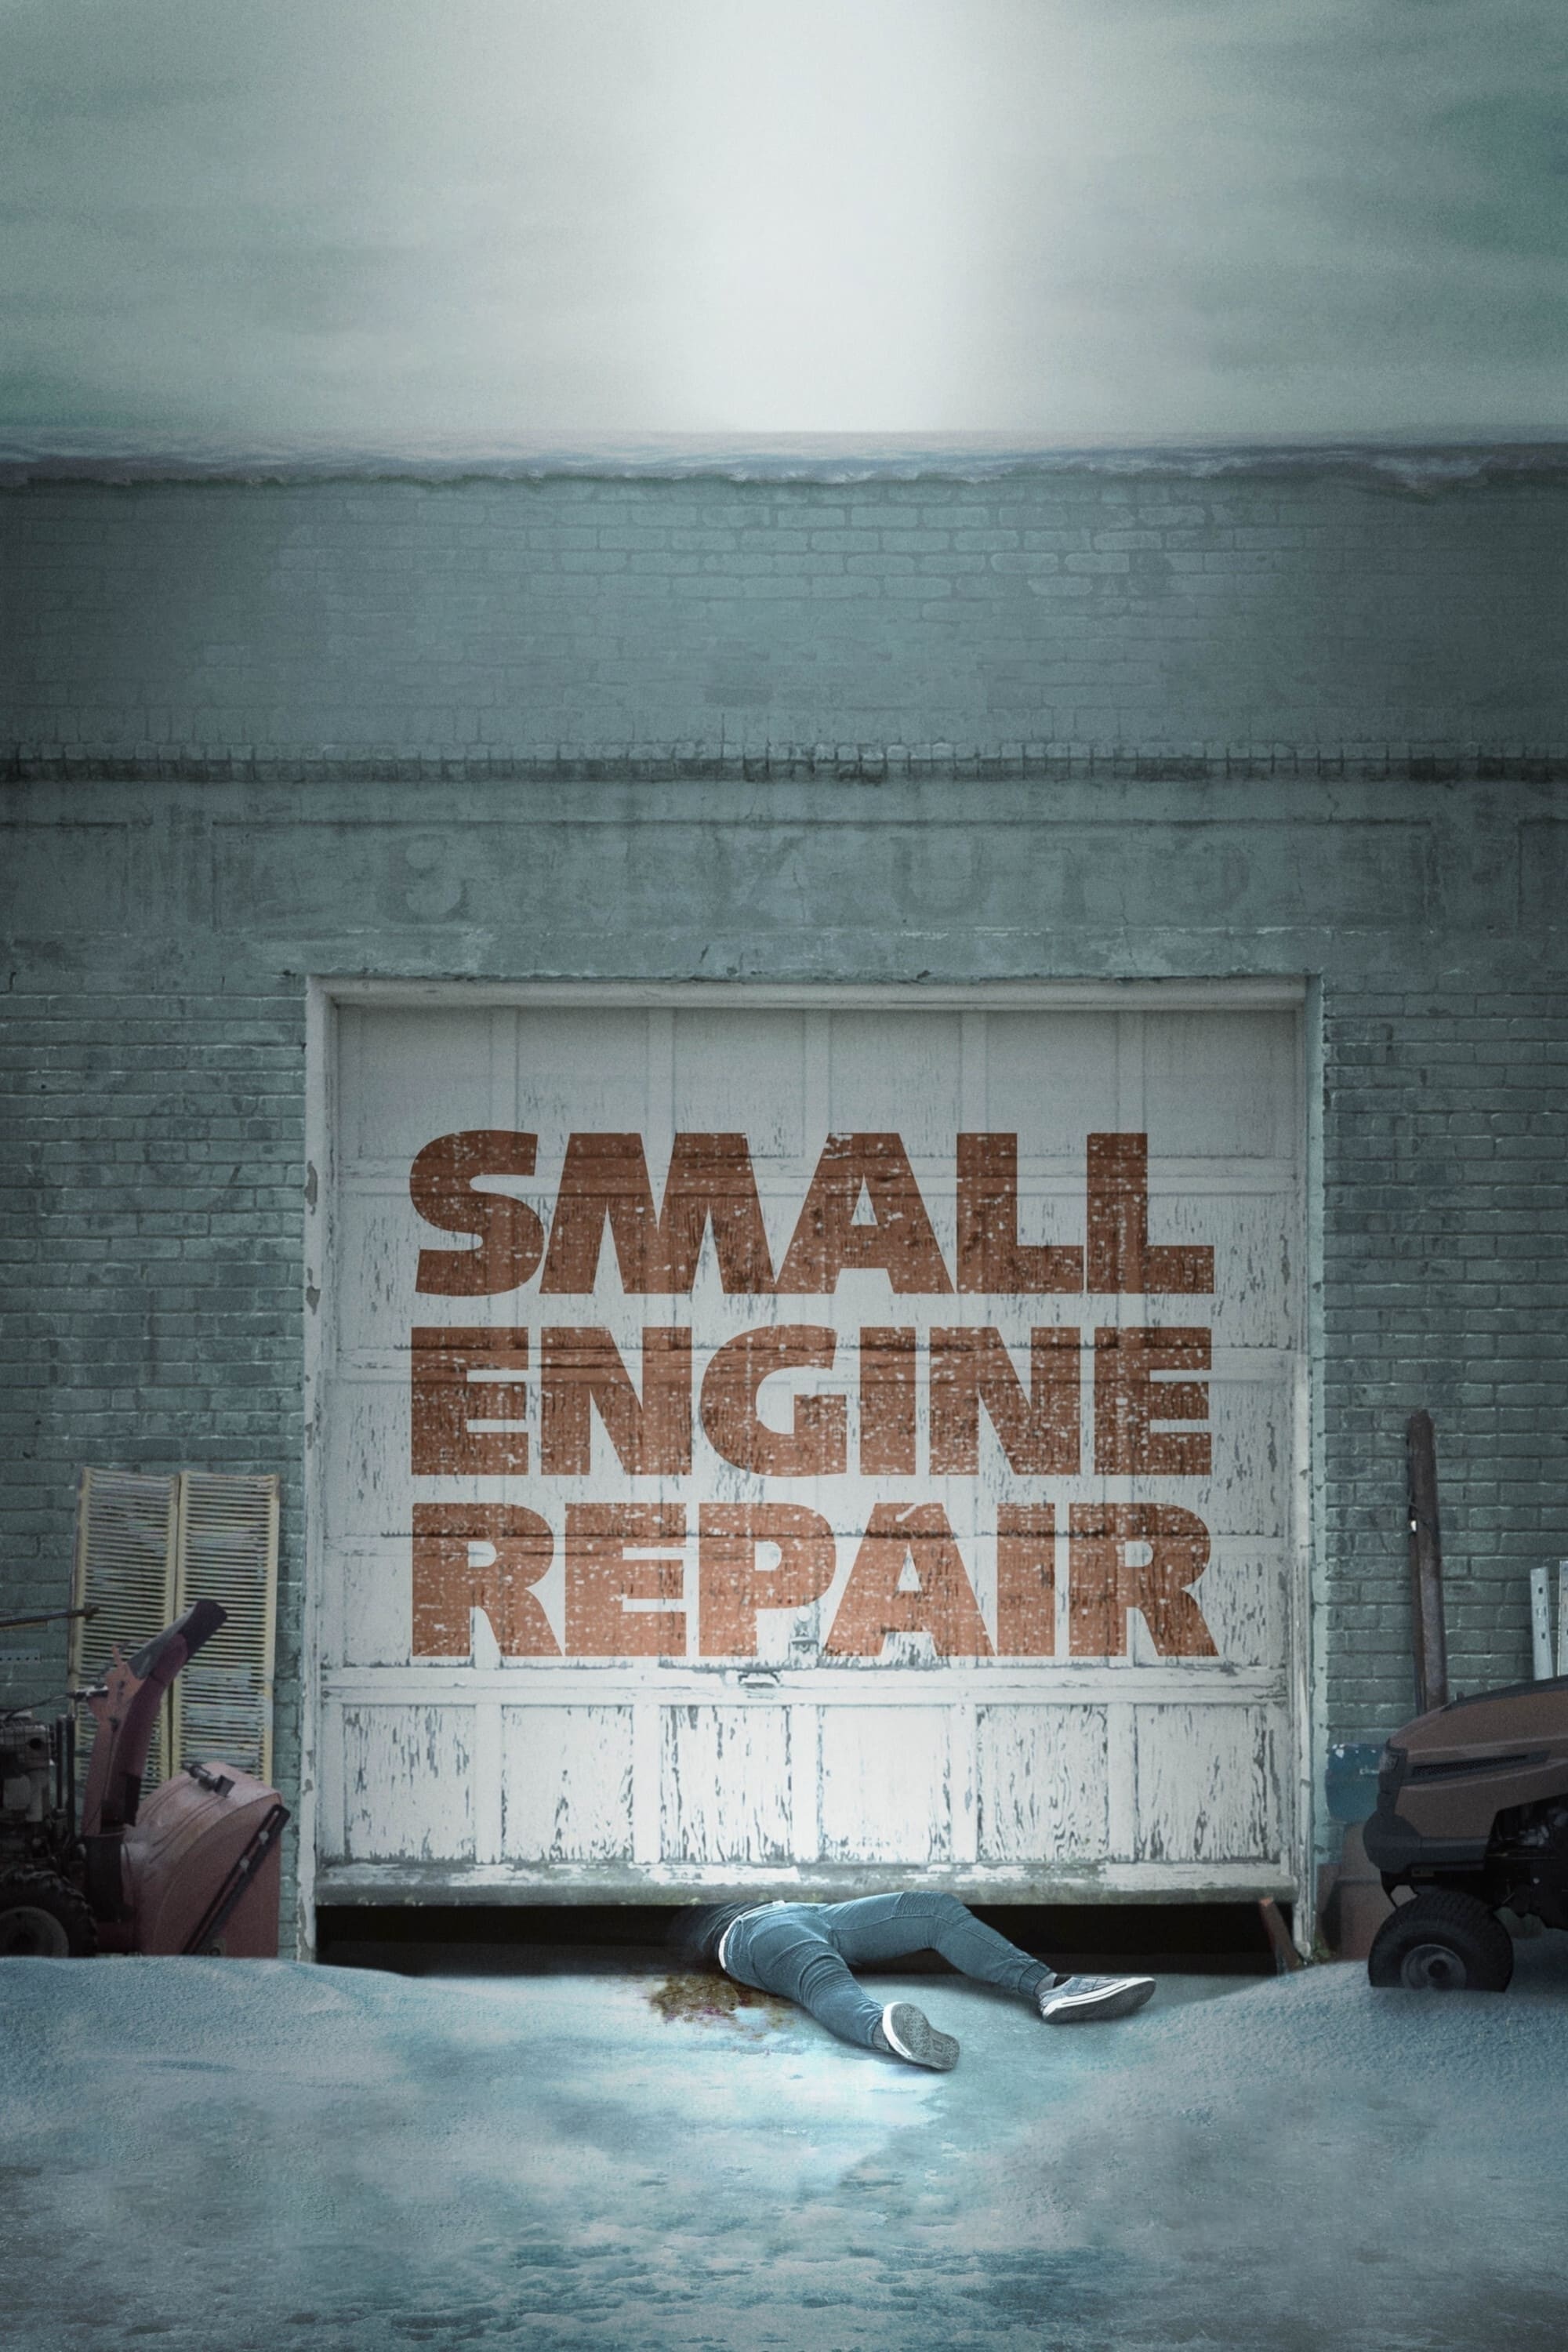 HD wallpaper, Gripping Drama, Secrets And Betrayal, Small Engine Repair Movie, Iphone Hd Small Engine Repair 2021 Background, Theatrical Adaptation, 2000X3000 Hd Phone